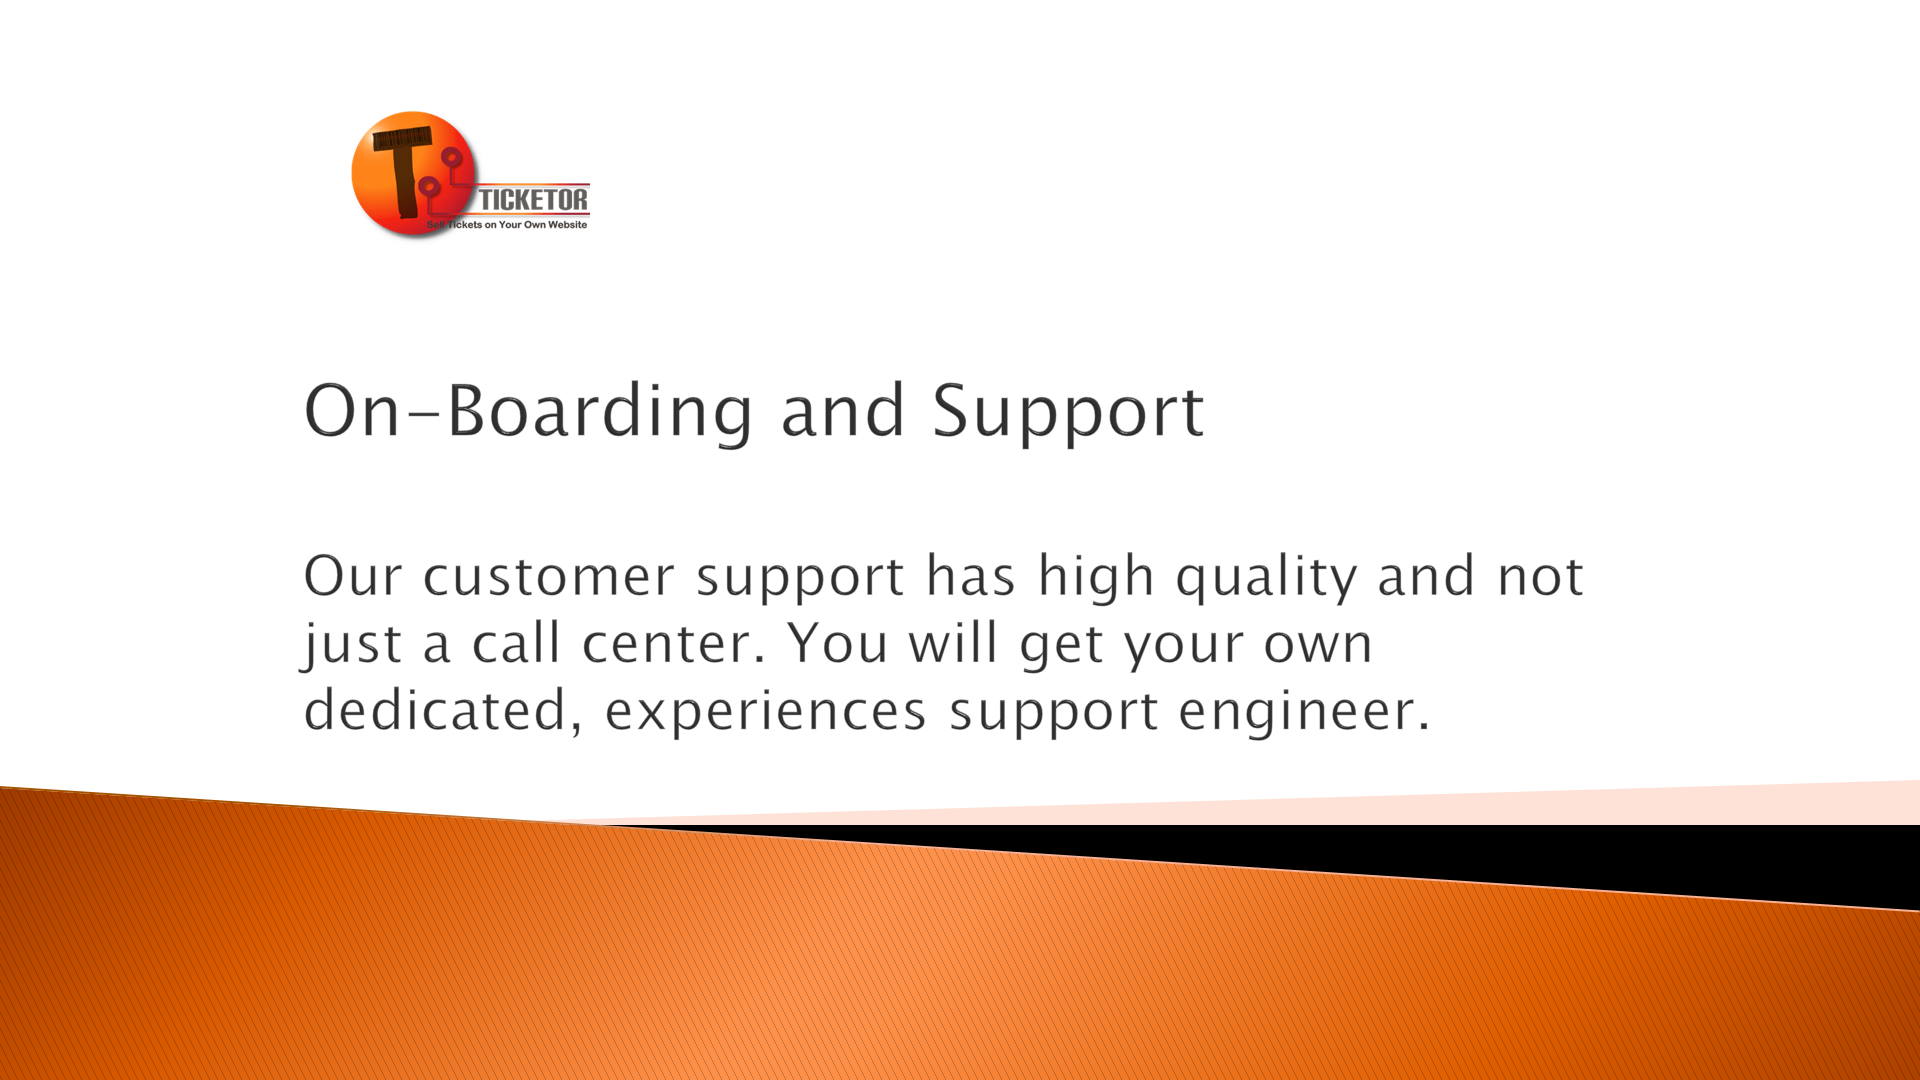 On-Boarding and Support